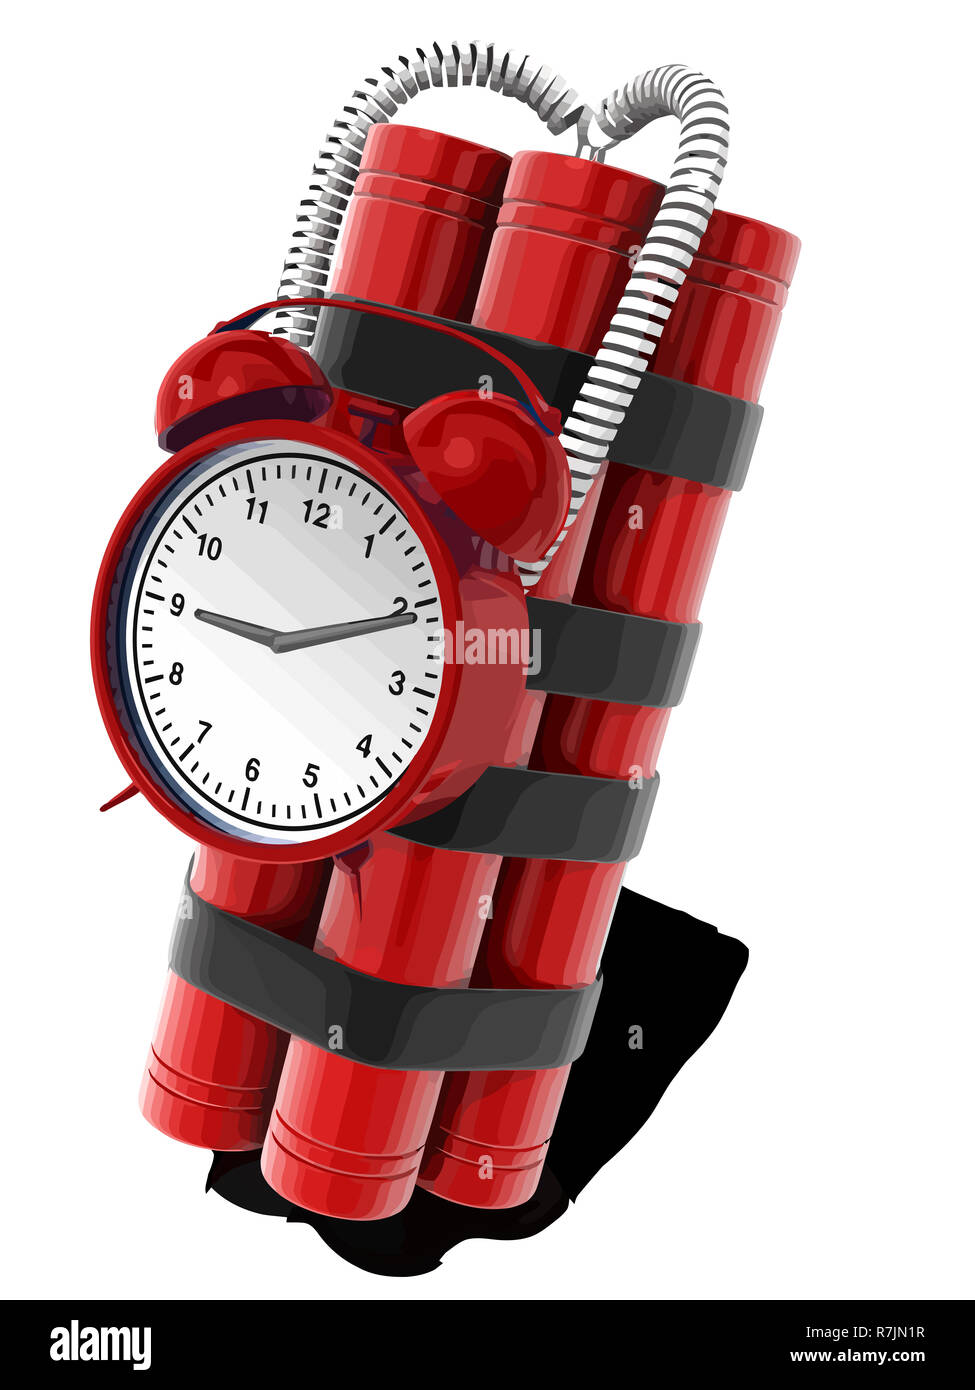 bomb dynamite red color clock timer countdown illustration Stock Photo -  Alamy